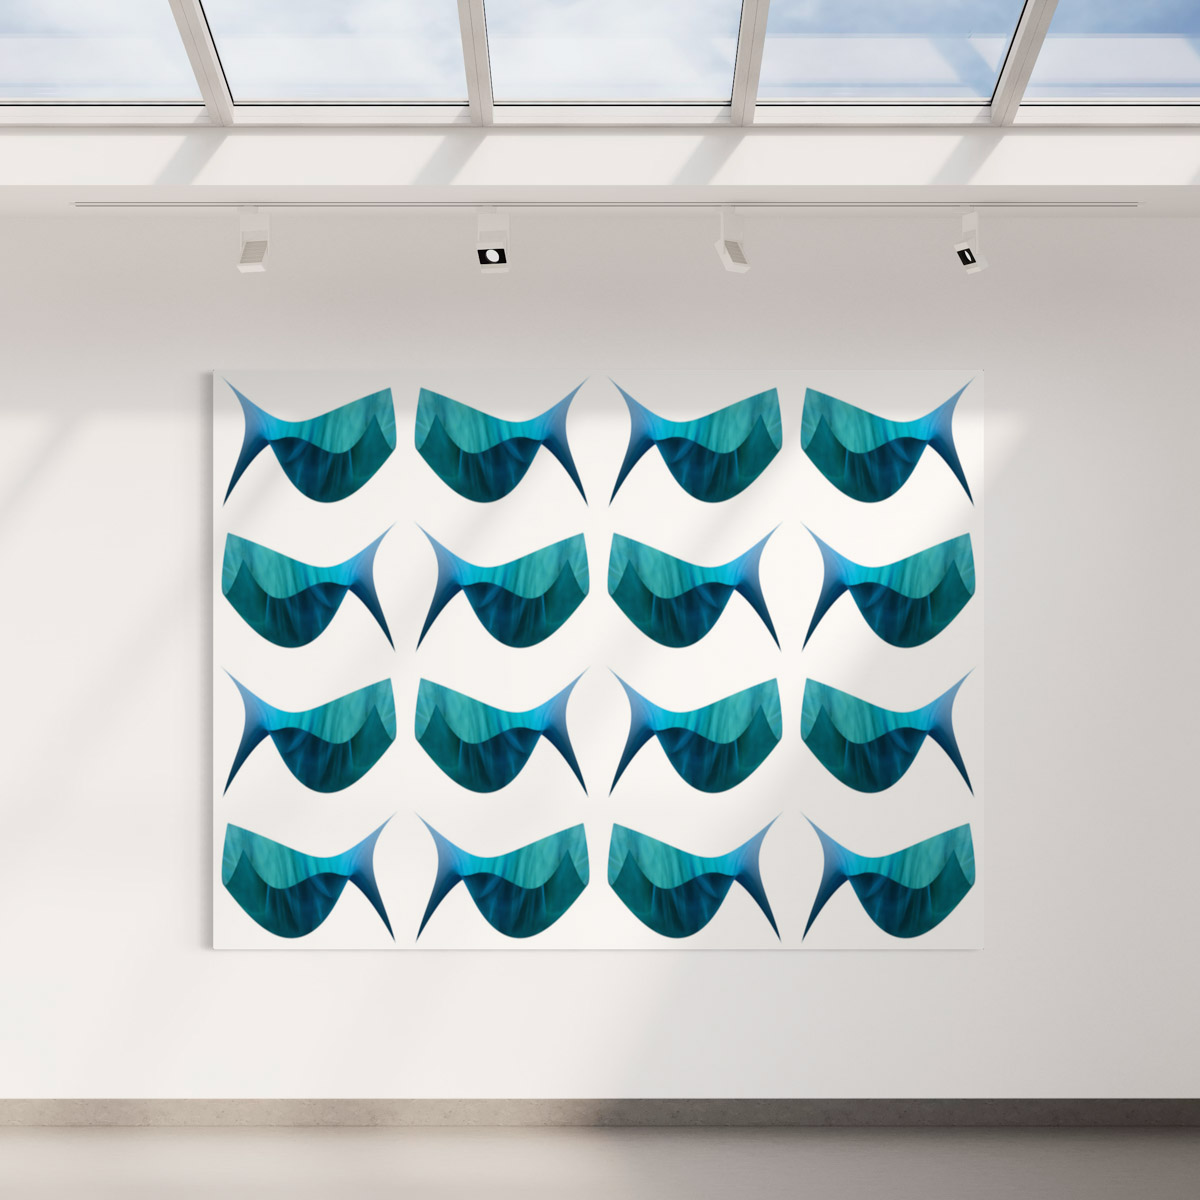 A white wall with many blue and green shapes on it